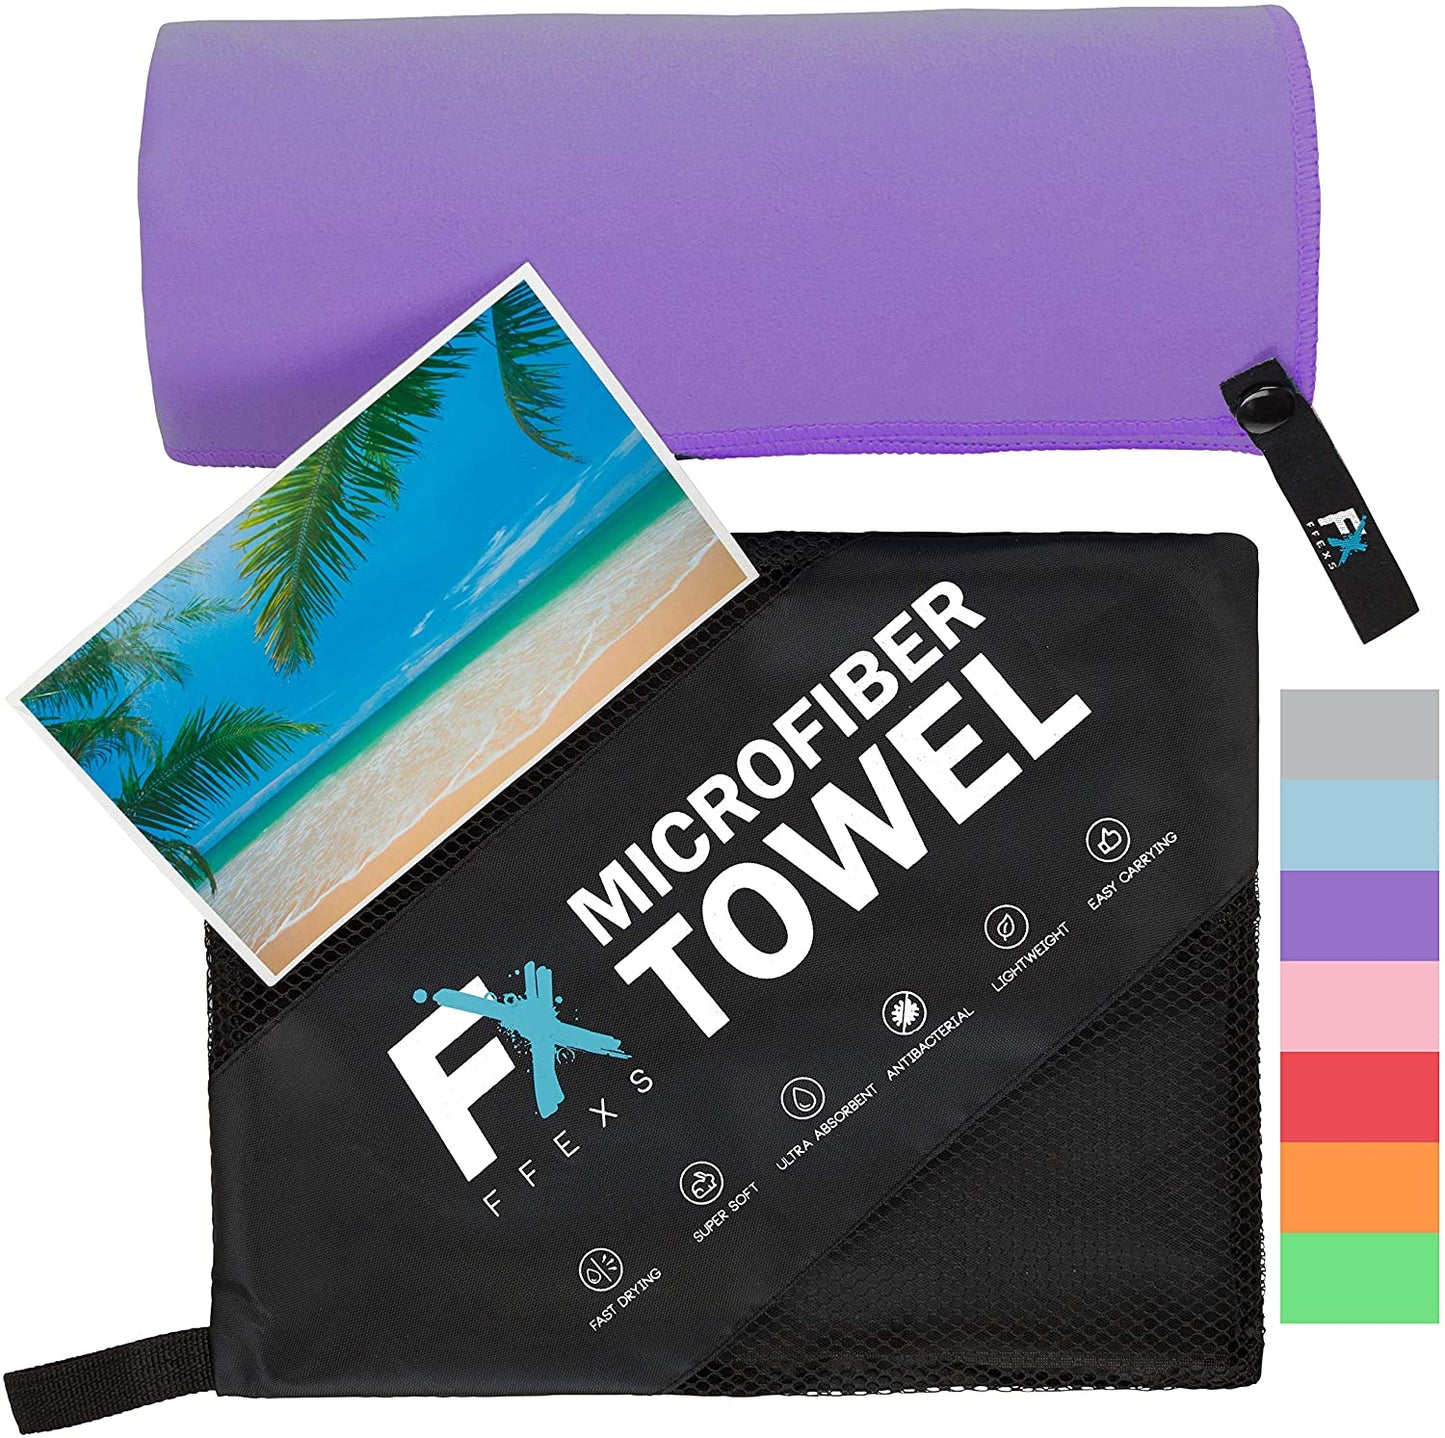 MICROFIBER TOWEL - Compact and Quick Drying | FFEXS®